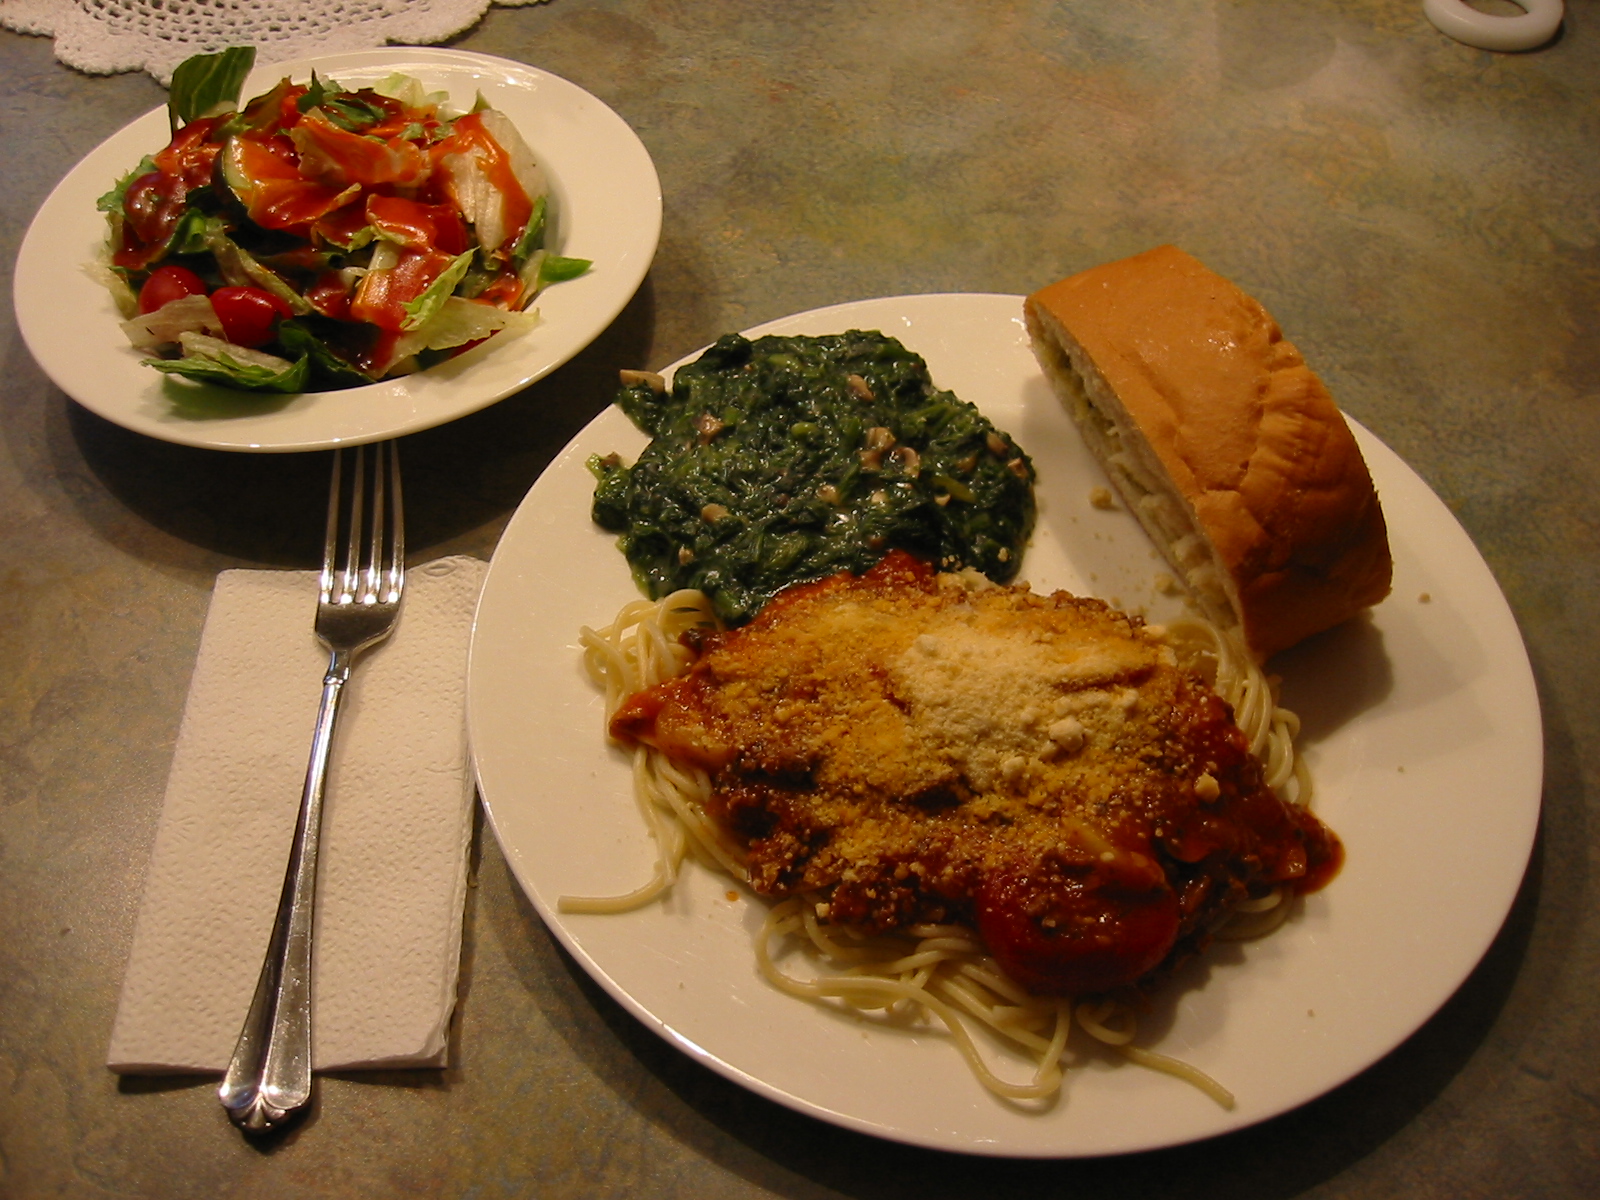 Spaghetti, creamed spinach with mushrooms, garlic bread and a lovely salad